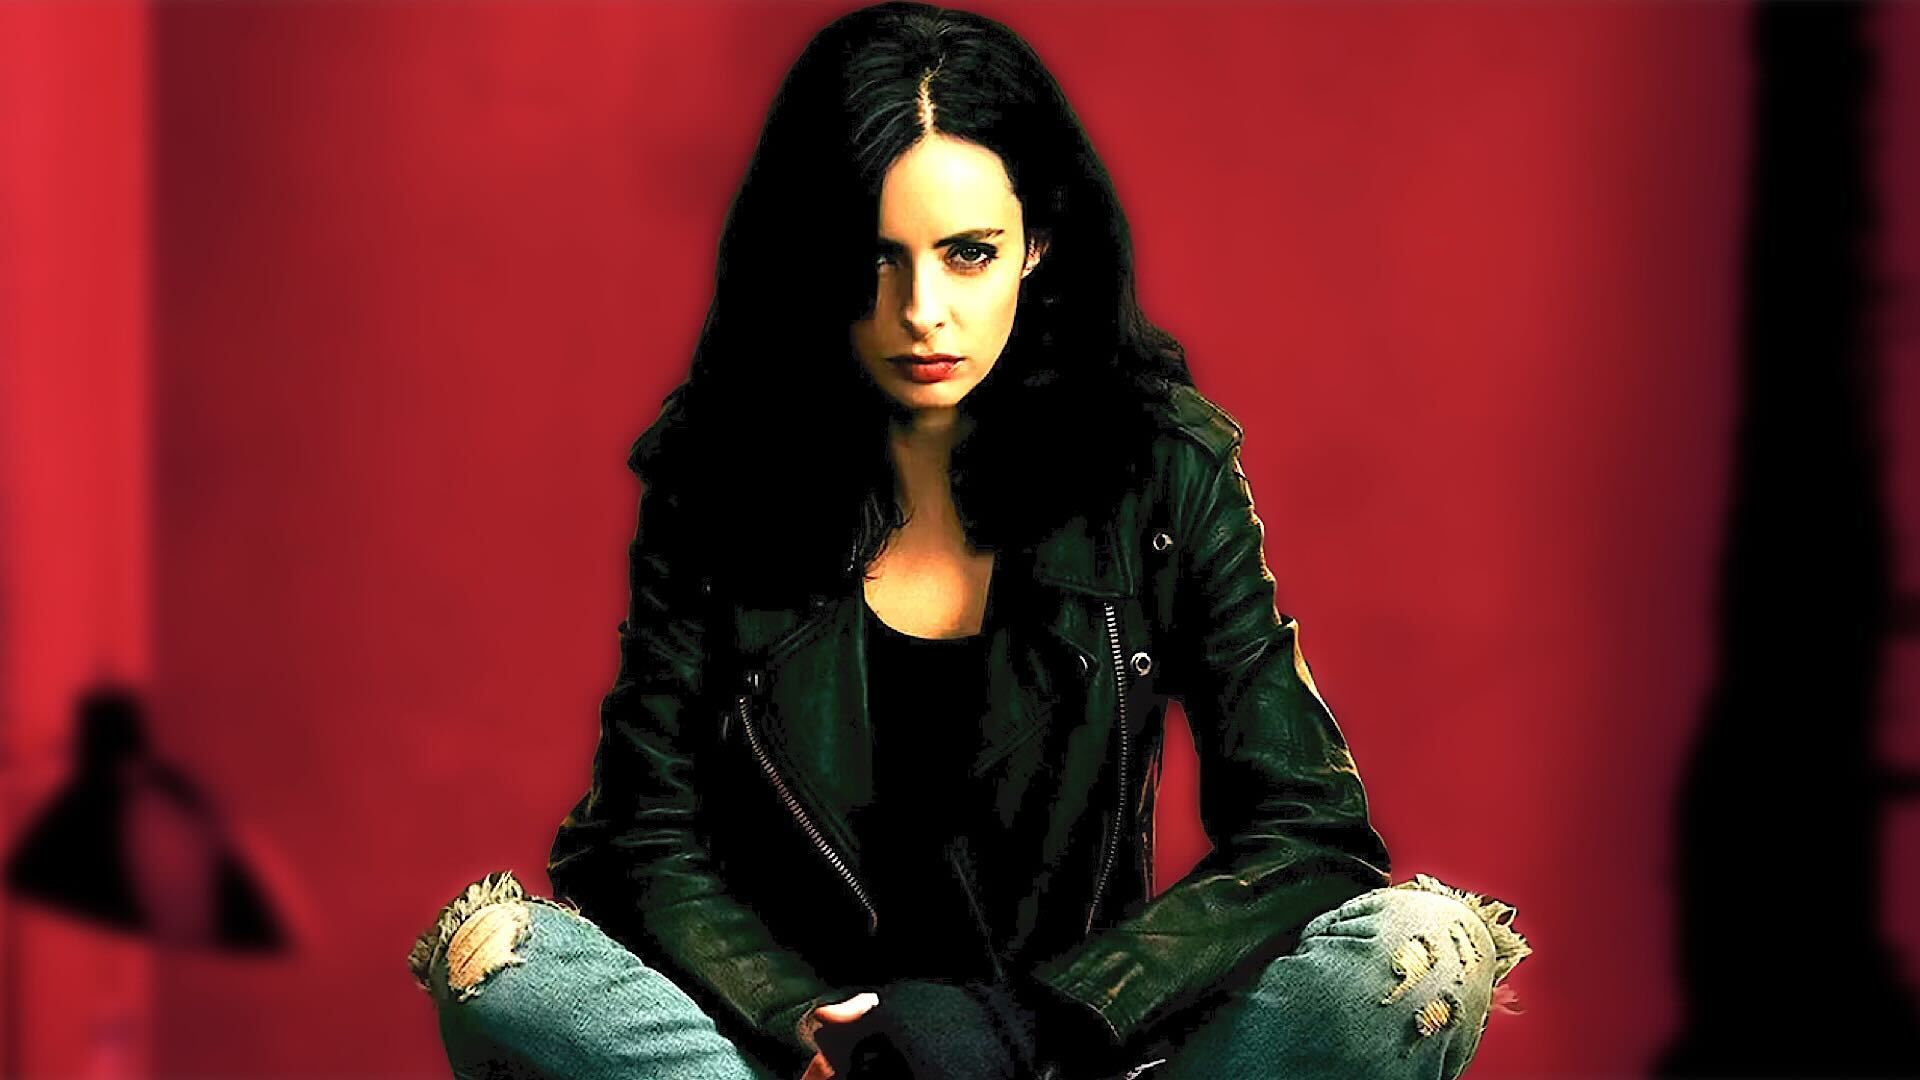 Krysten Ritter as Jessica Jones sitting with red background